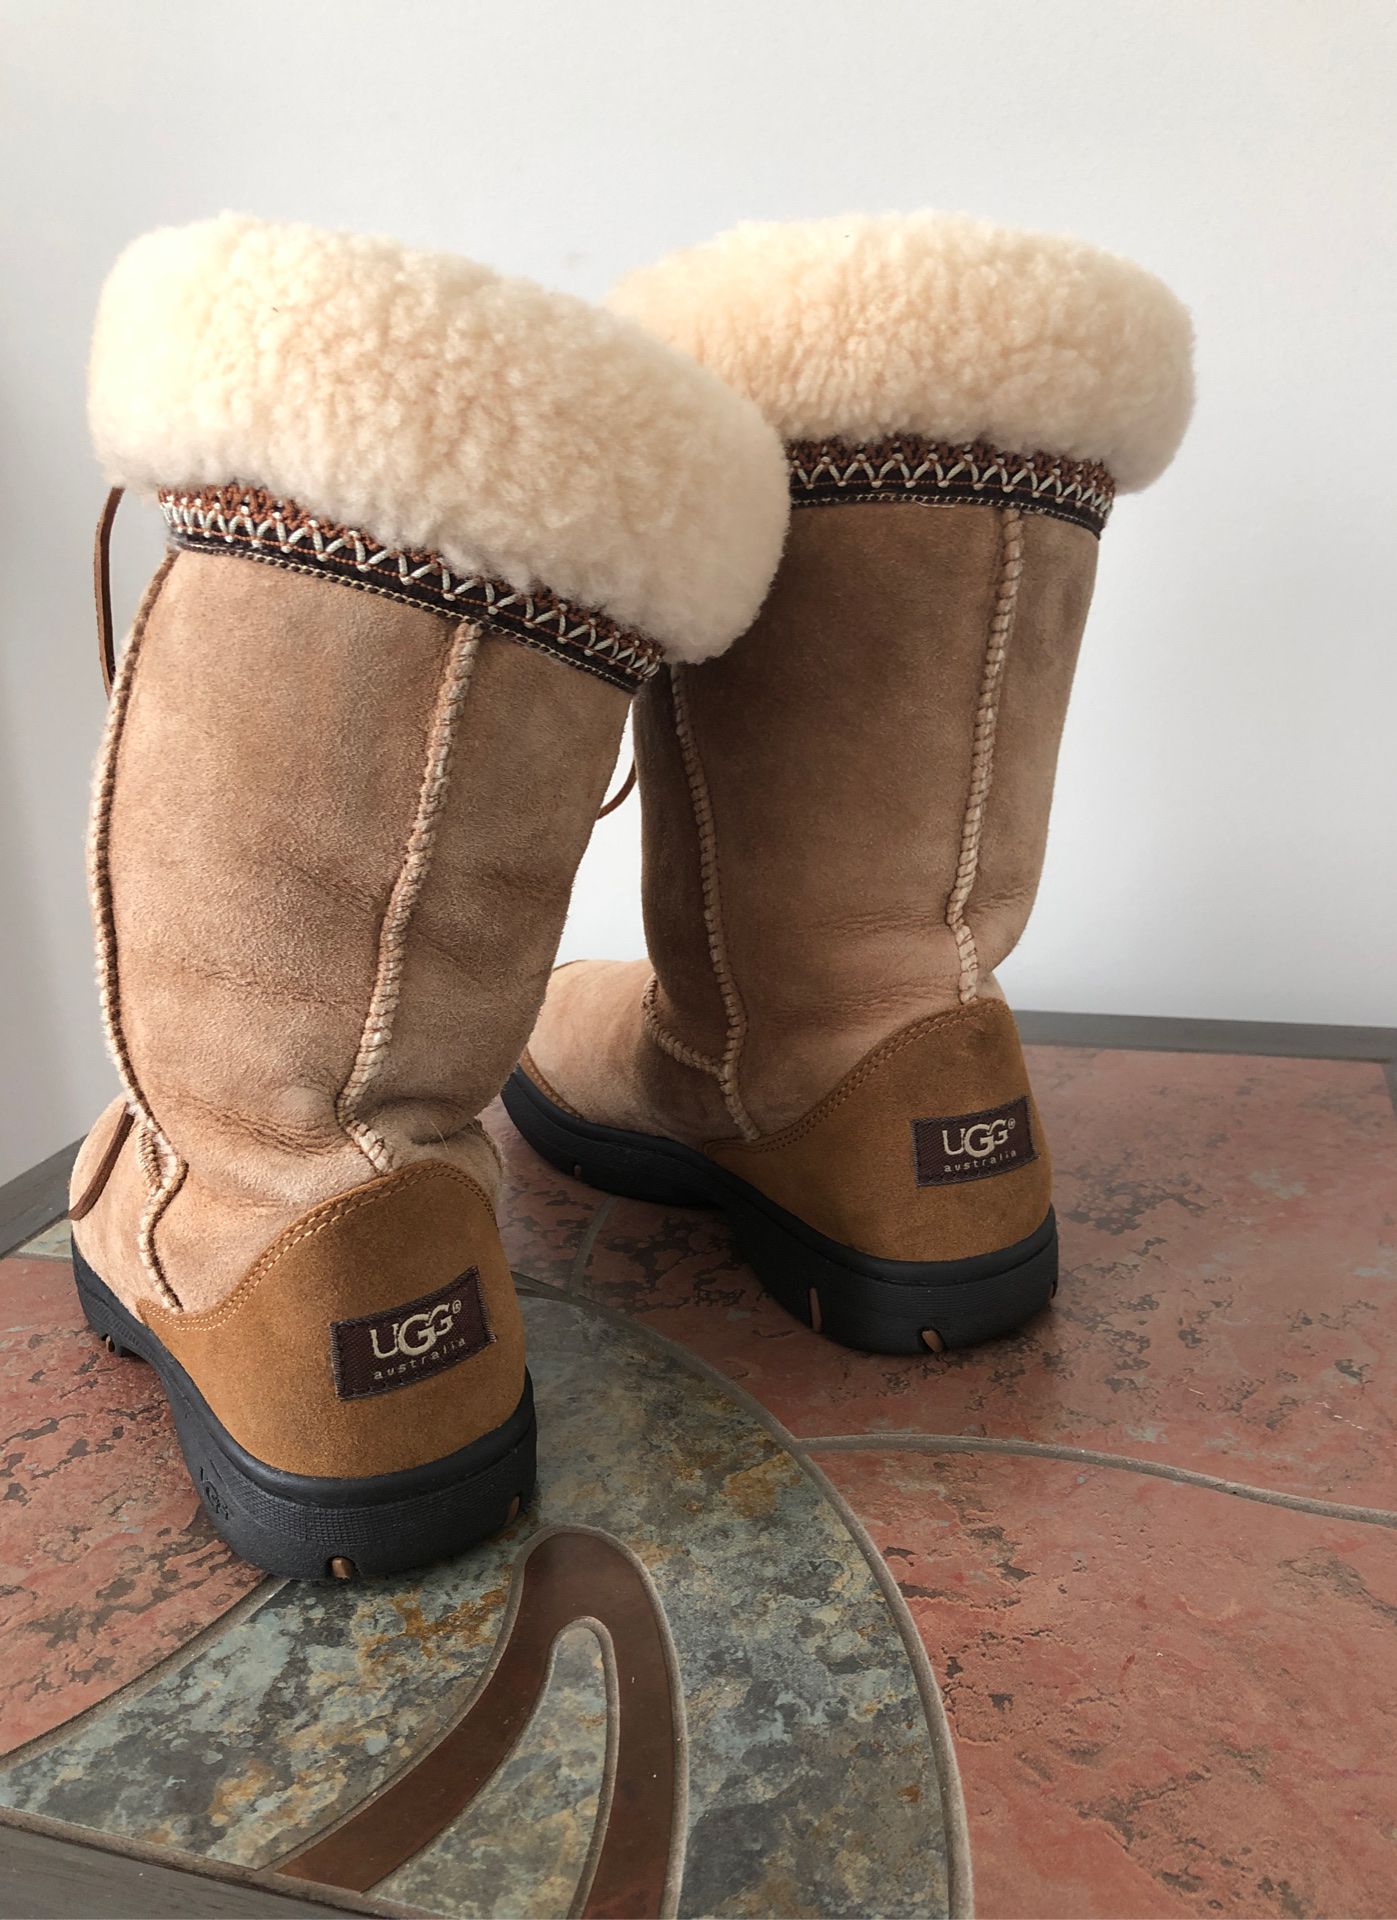 Ugg Carmel suede boots